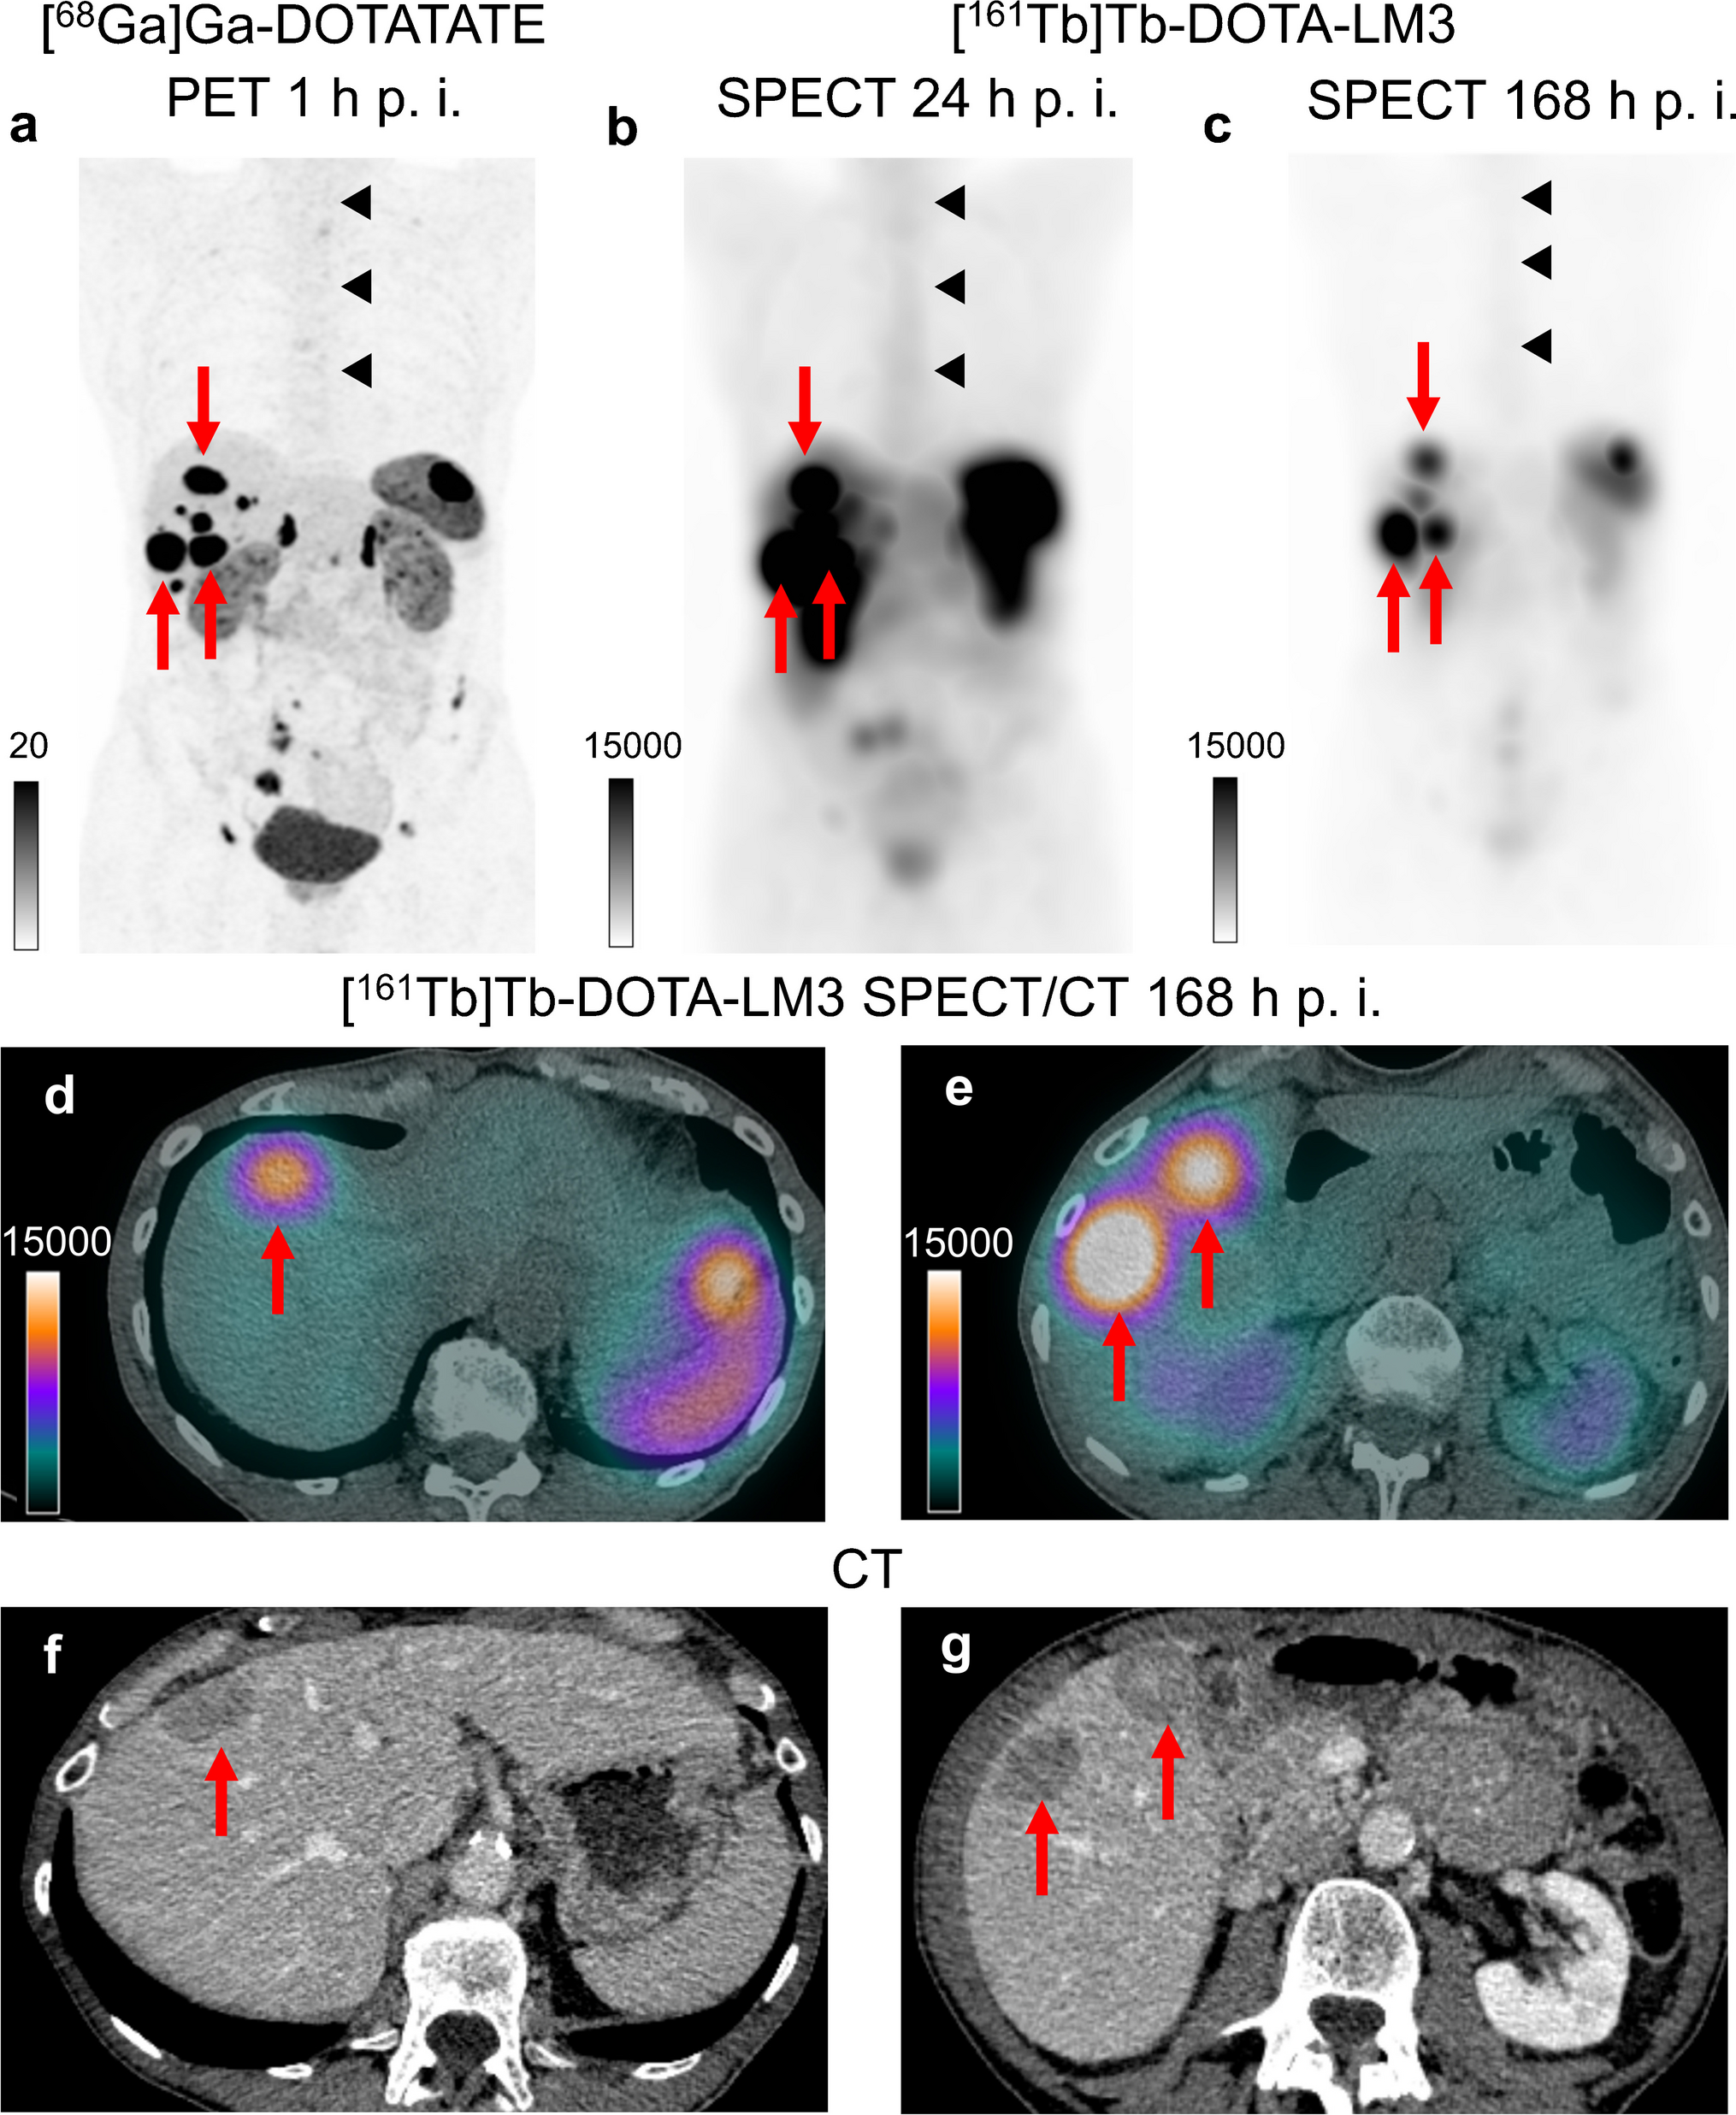 First-in-human administration of terbium-161-labelled somatostatin receptor subtype 2 antagonist ([161Tb]Tb-DOTA-LM3) in a patient with a metastatic neuroendocrine tumour of the ileum